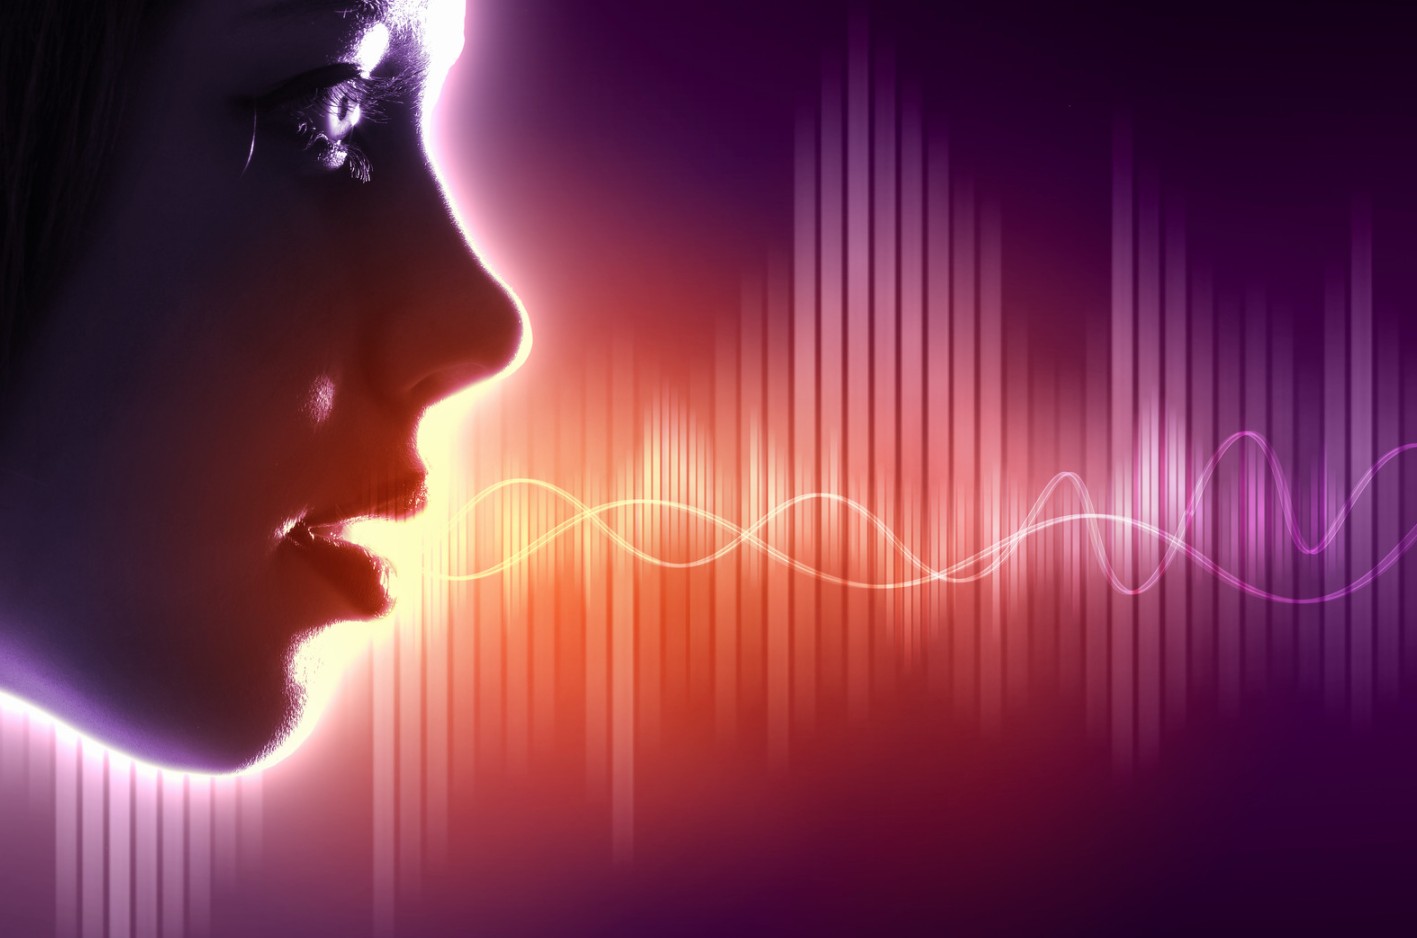 A futuristic image showing a profile of a persons face with sound waves coming out of the mouth.